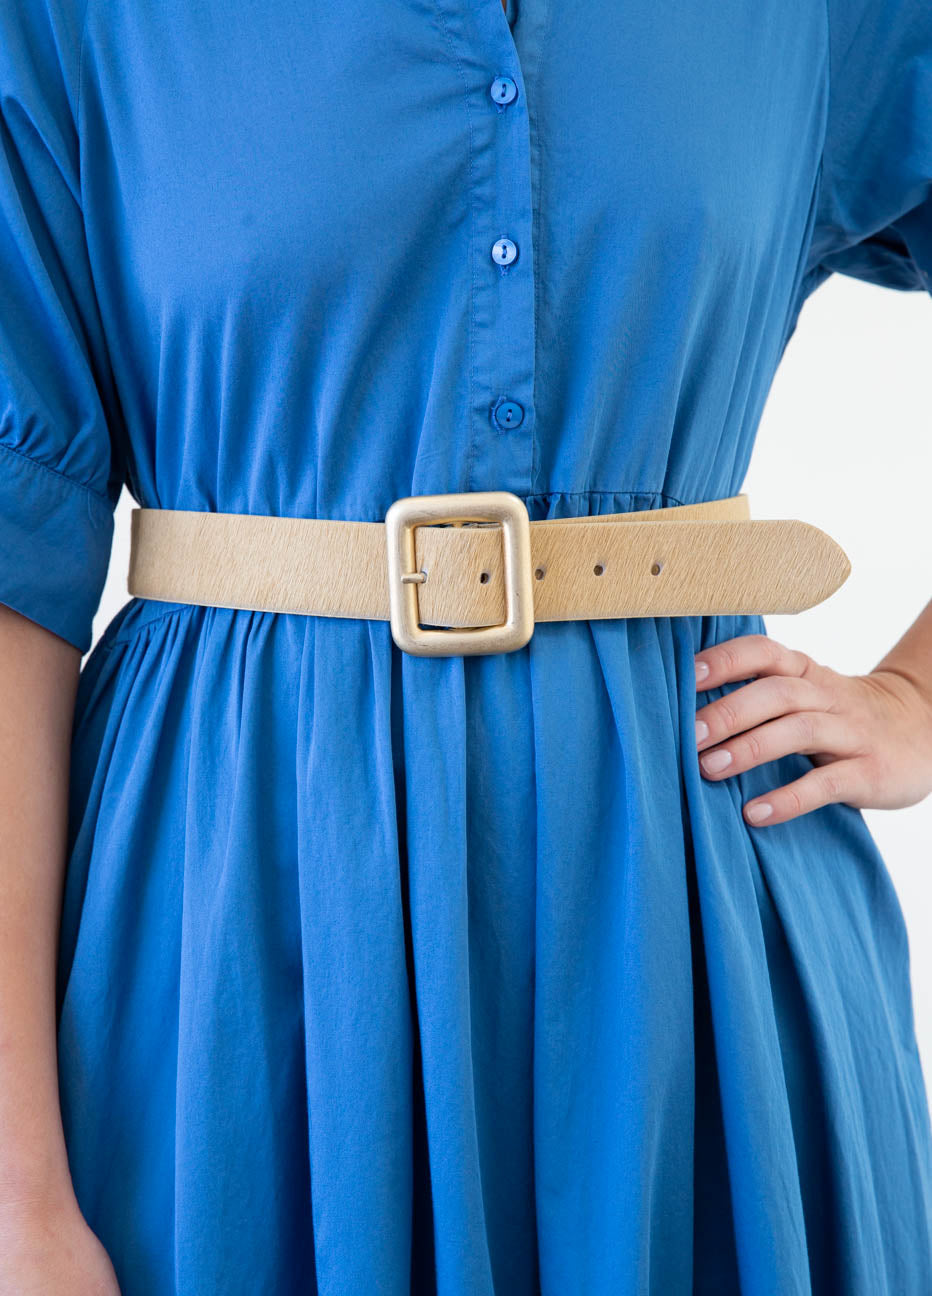 Tan Pony Hair and Brushed Brass Belt